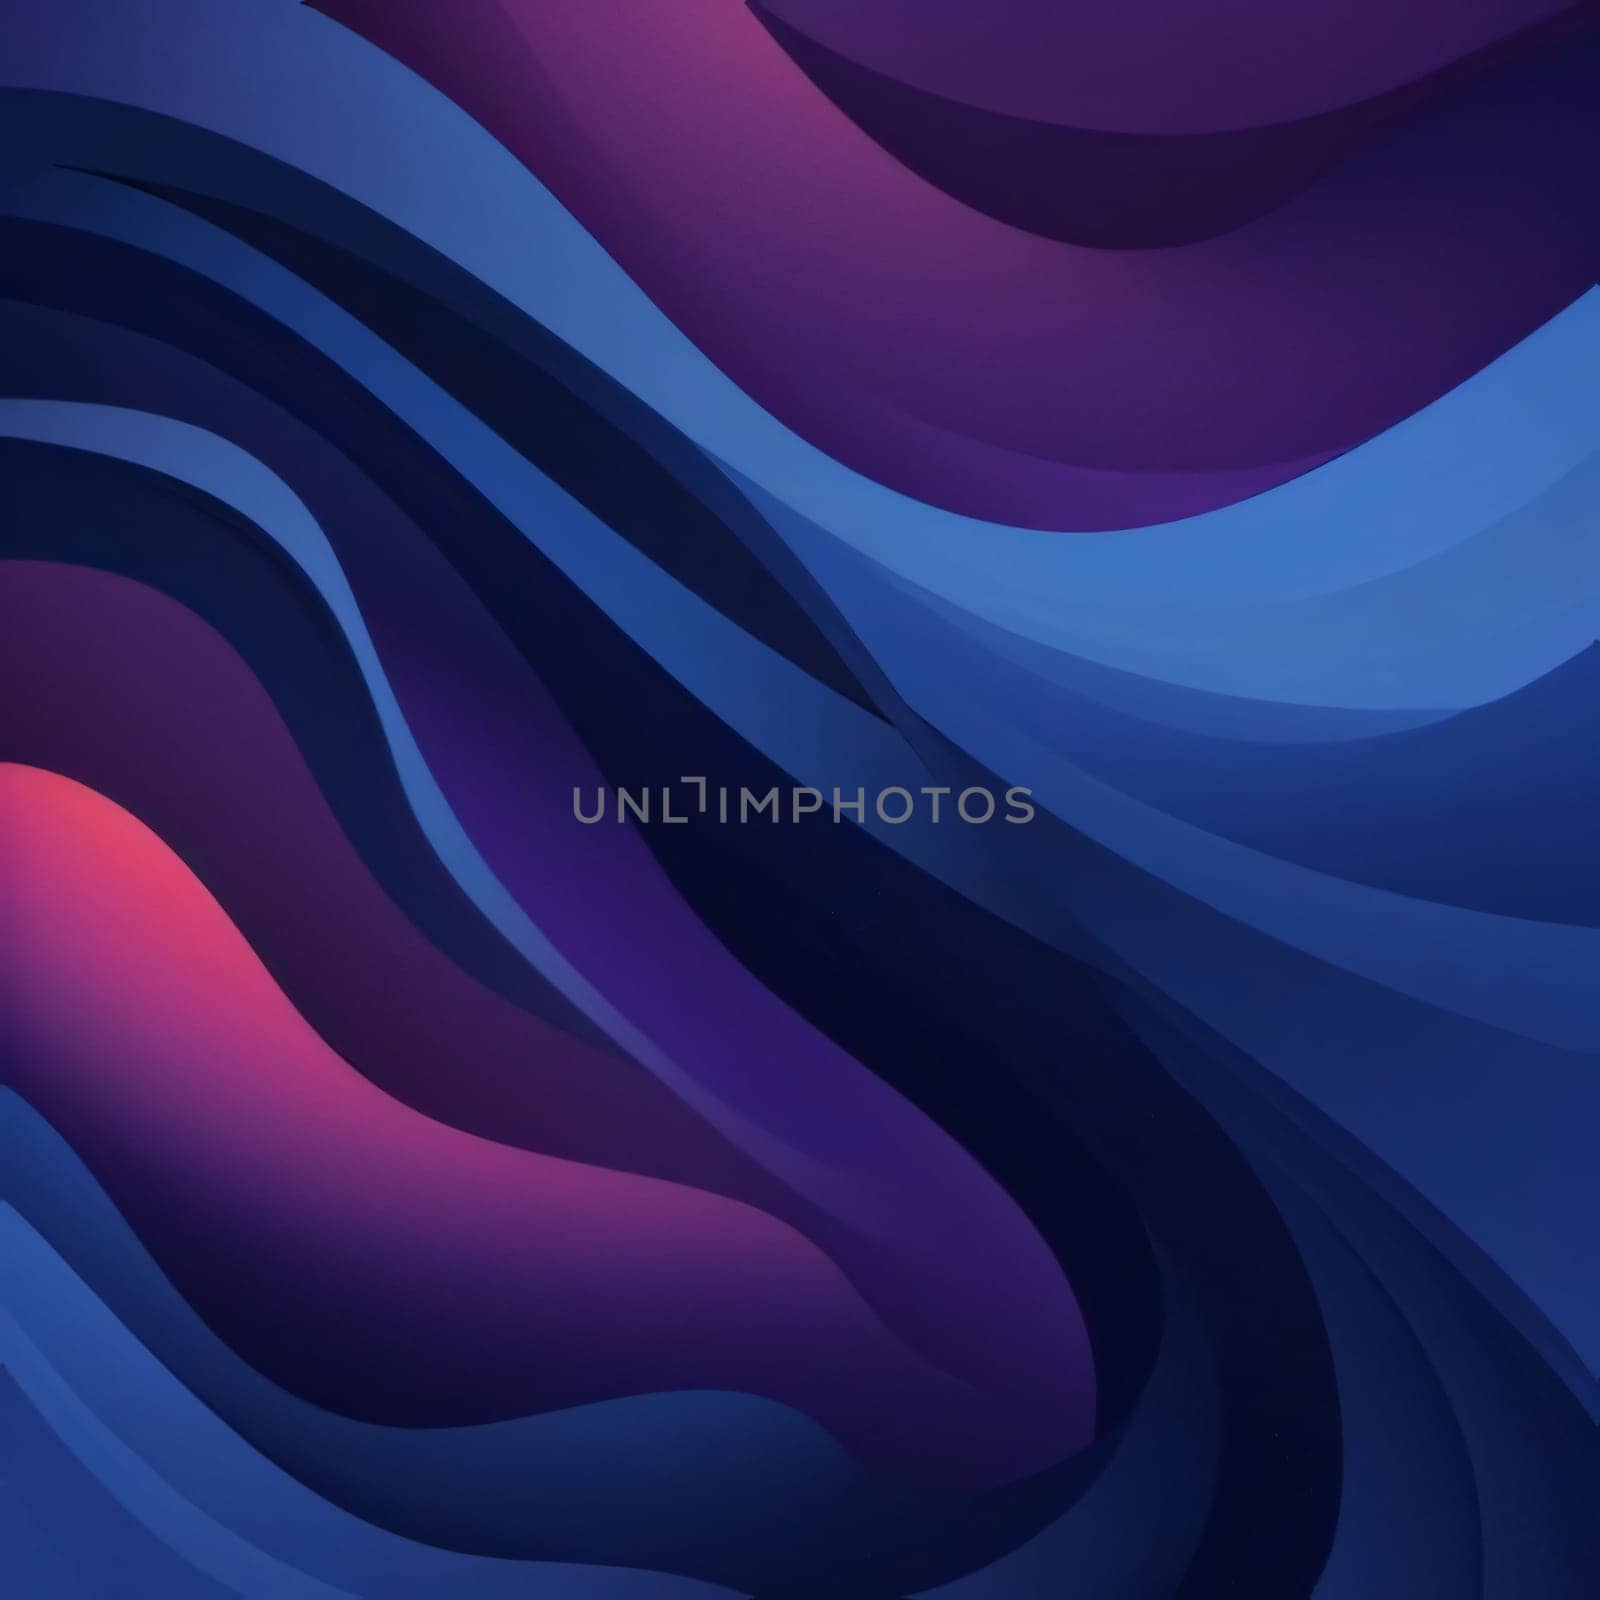 Abstract background design: Abstract background with blue and purple wavy lines. Vector illustration.